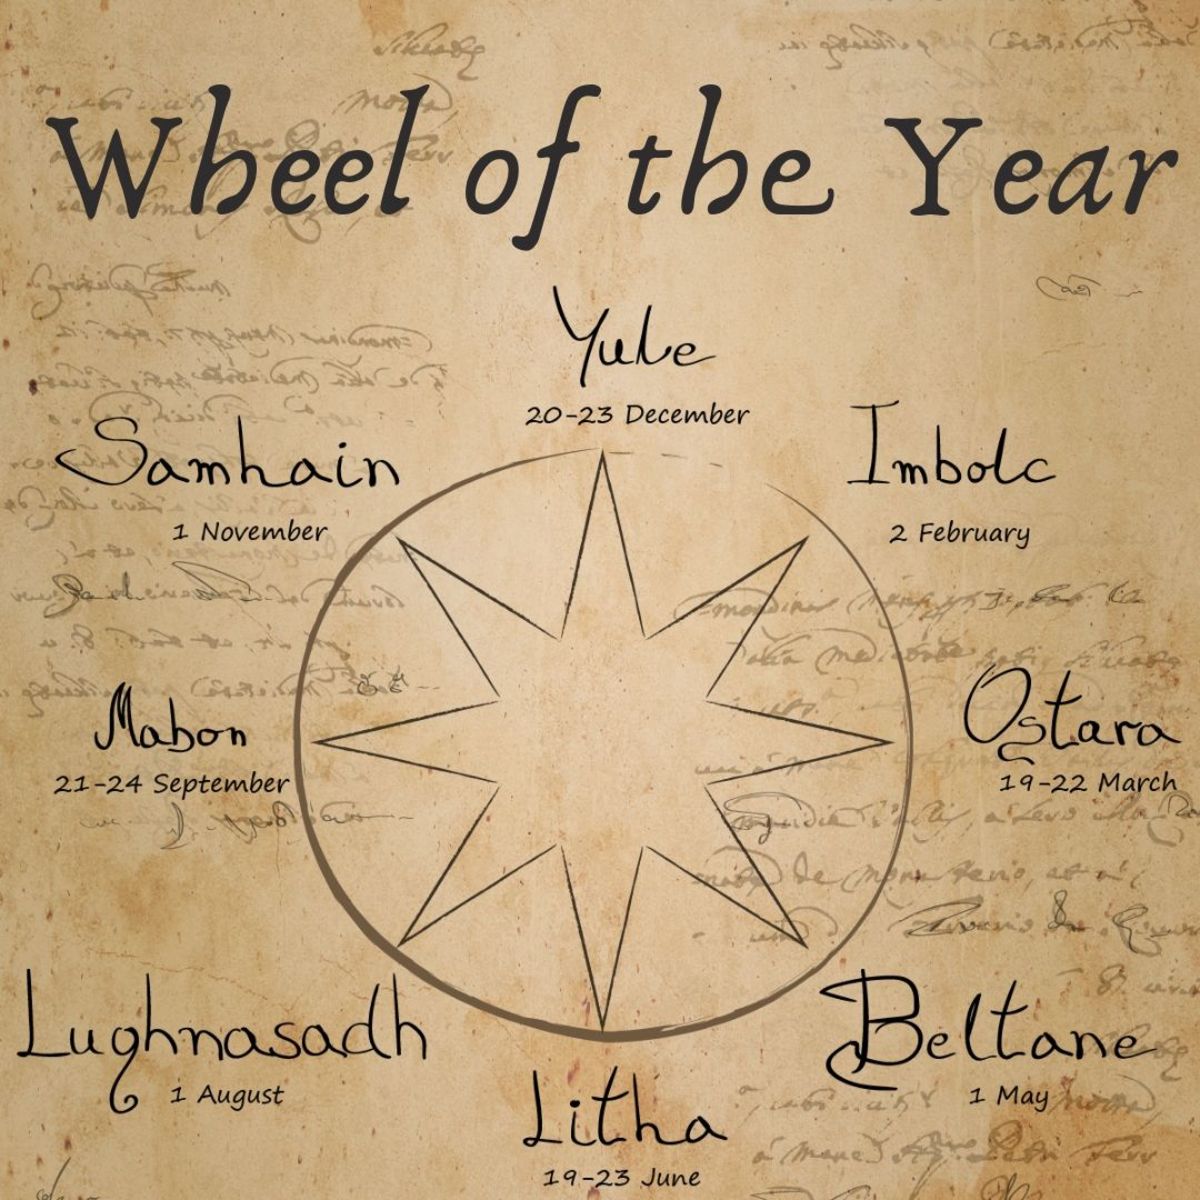 Learn all about the Wheel of the Year and the Wiccan calendar and holidays.